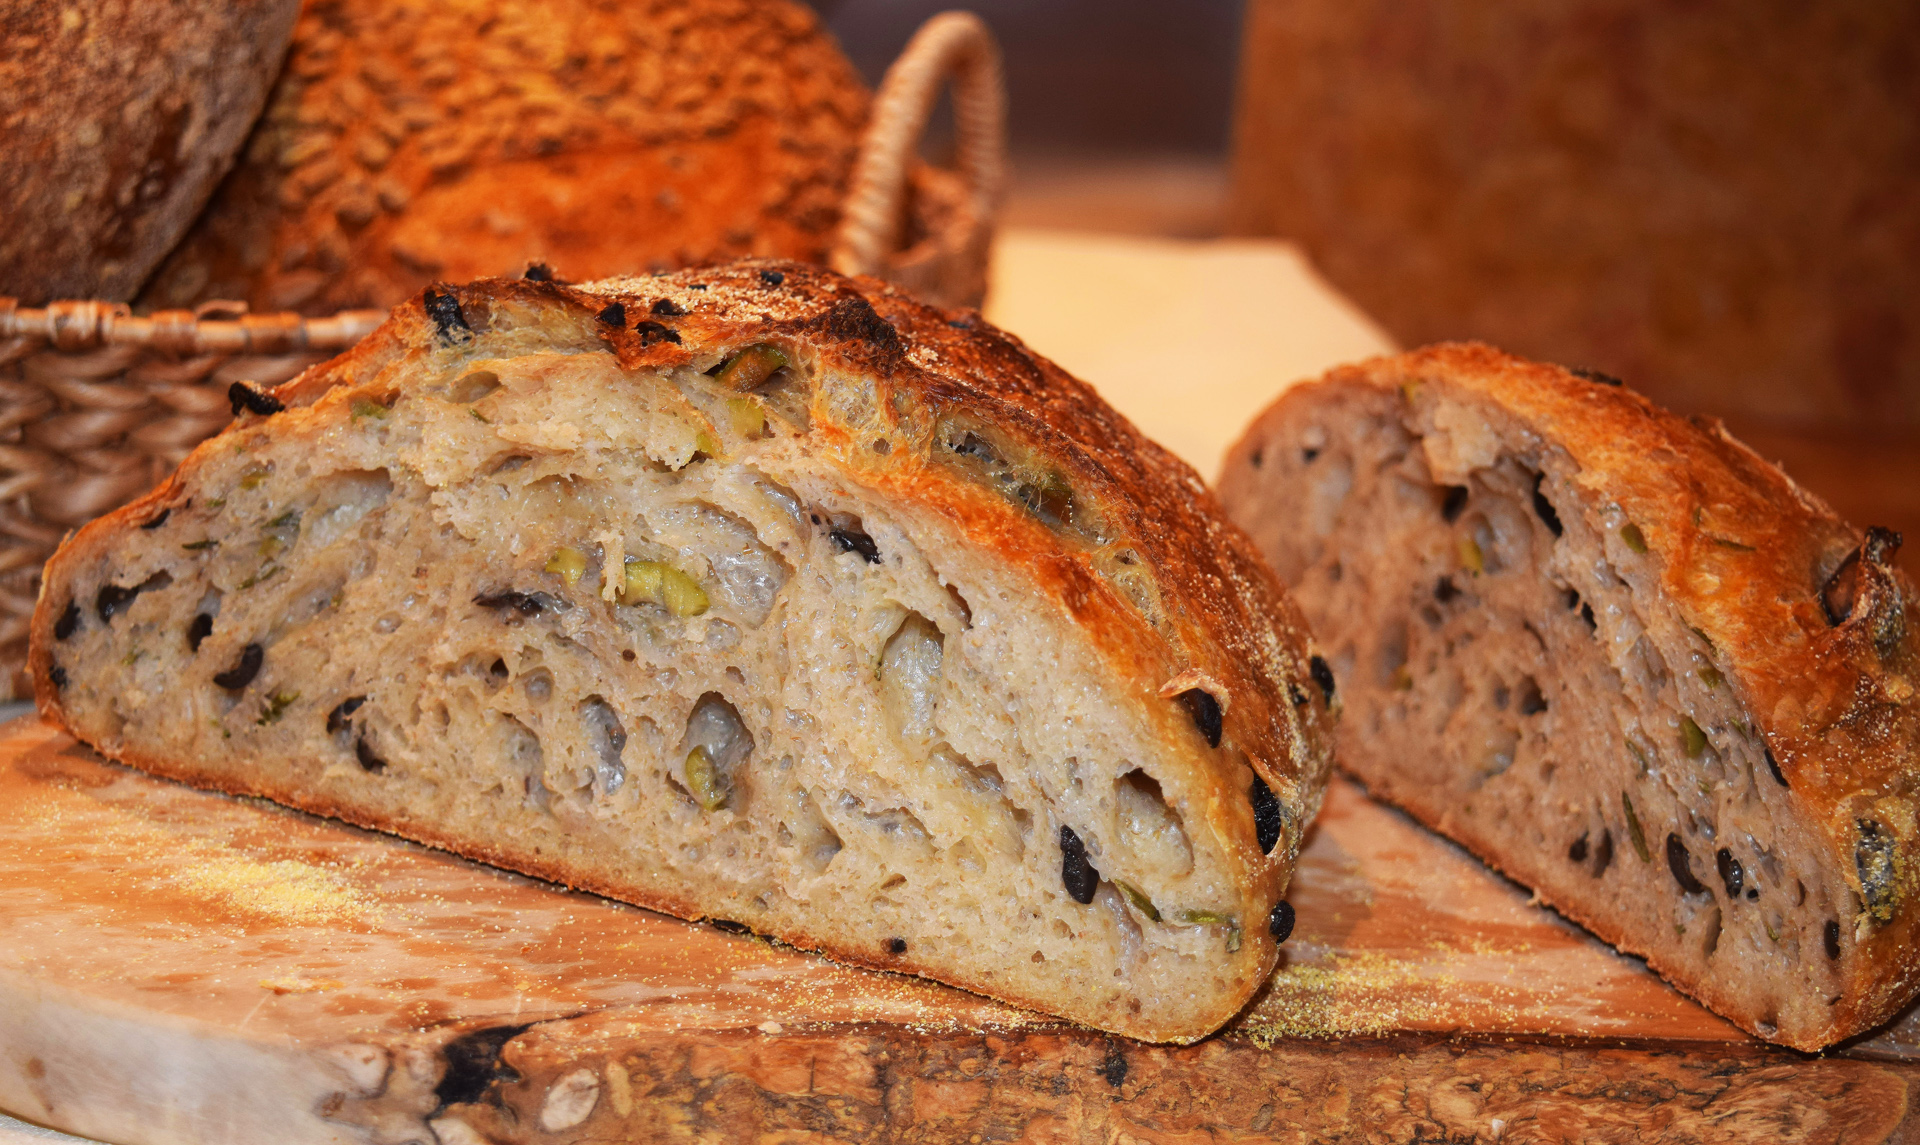 The outstanding rosemary olive bread is tangy and flavorful, with subtle hints of rosemary and two kinds of olives, black and green.